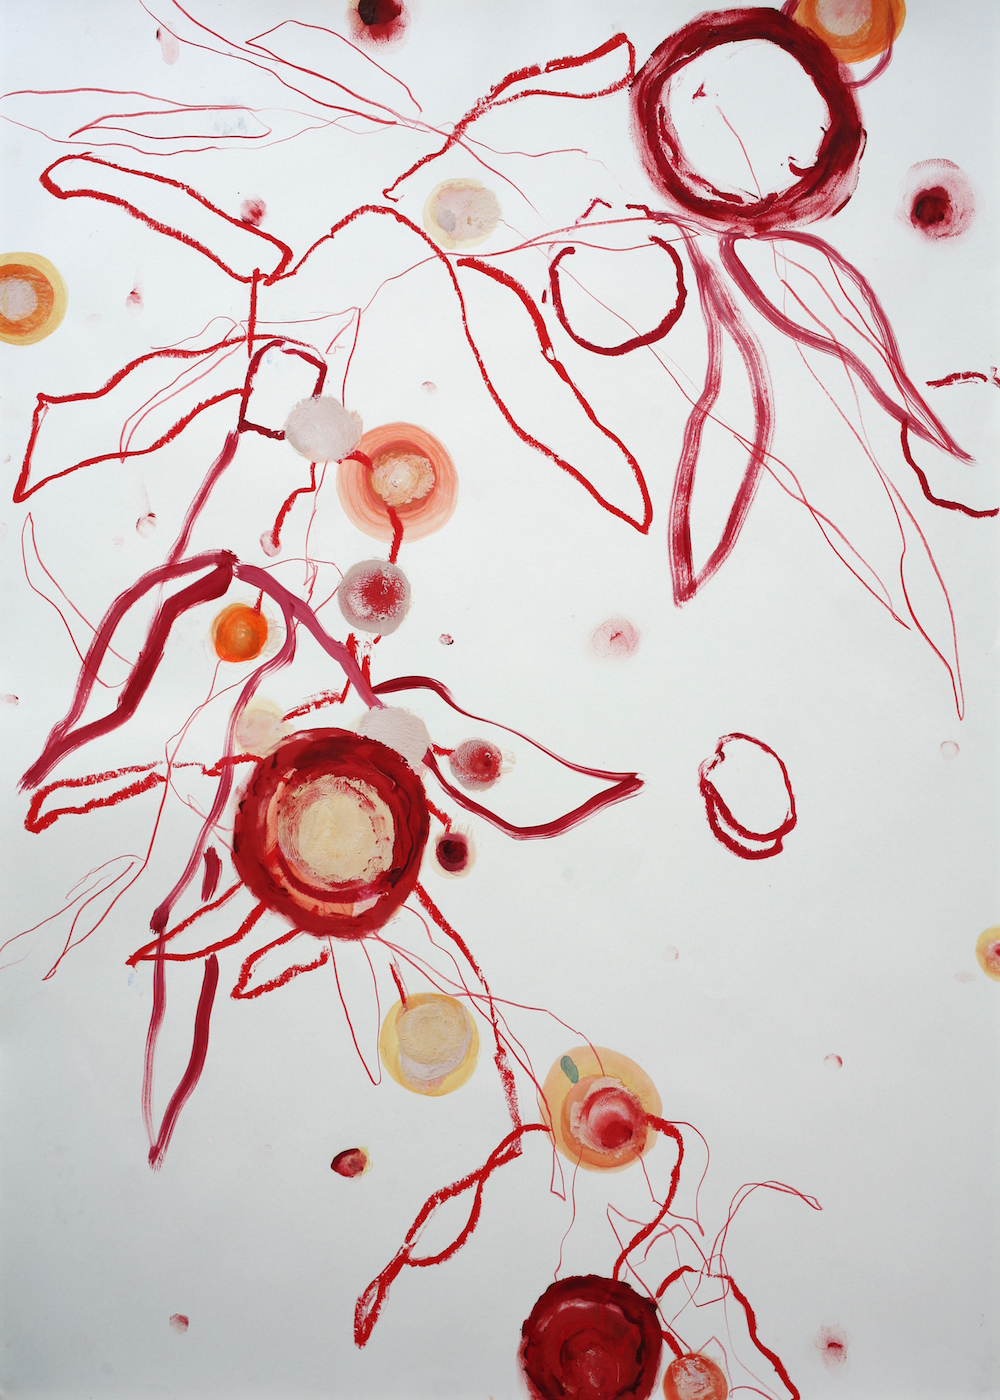 3 - Untitled (Tournesols rouges2),2020,oilstick and colored pencil on paper,105x75cm web